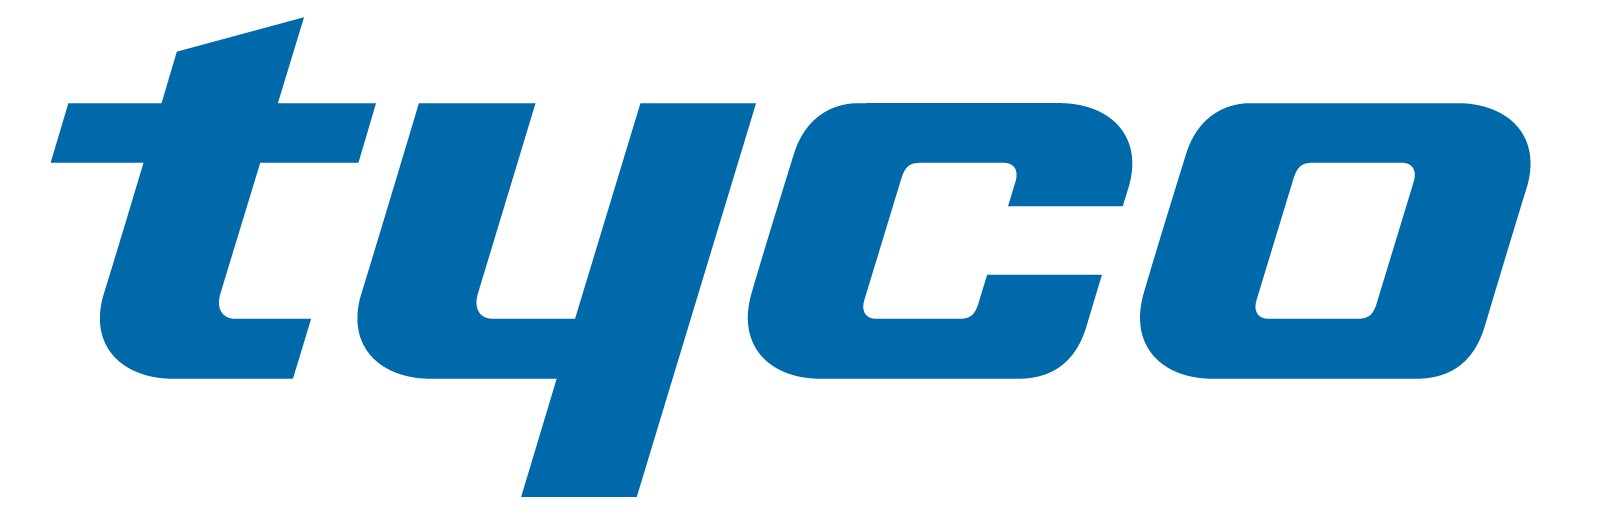 PRODUCTS UNLIMITED (Tyco)